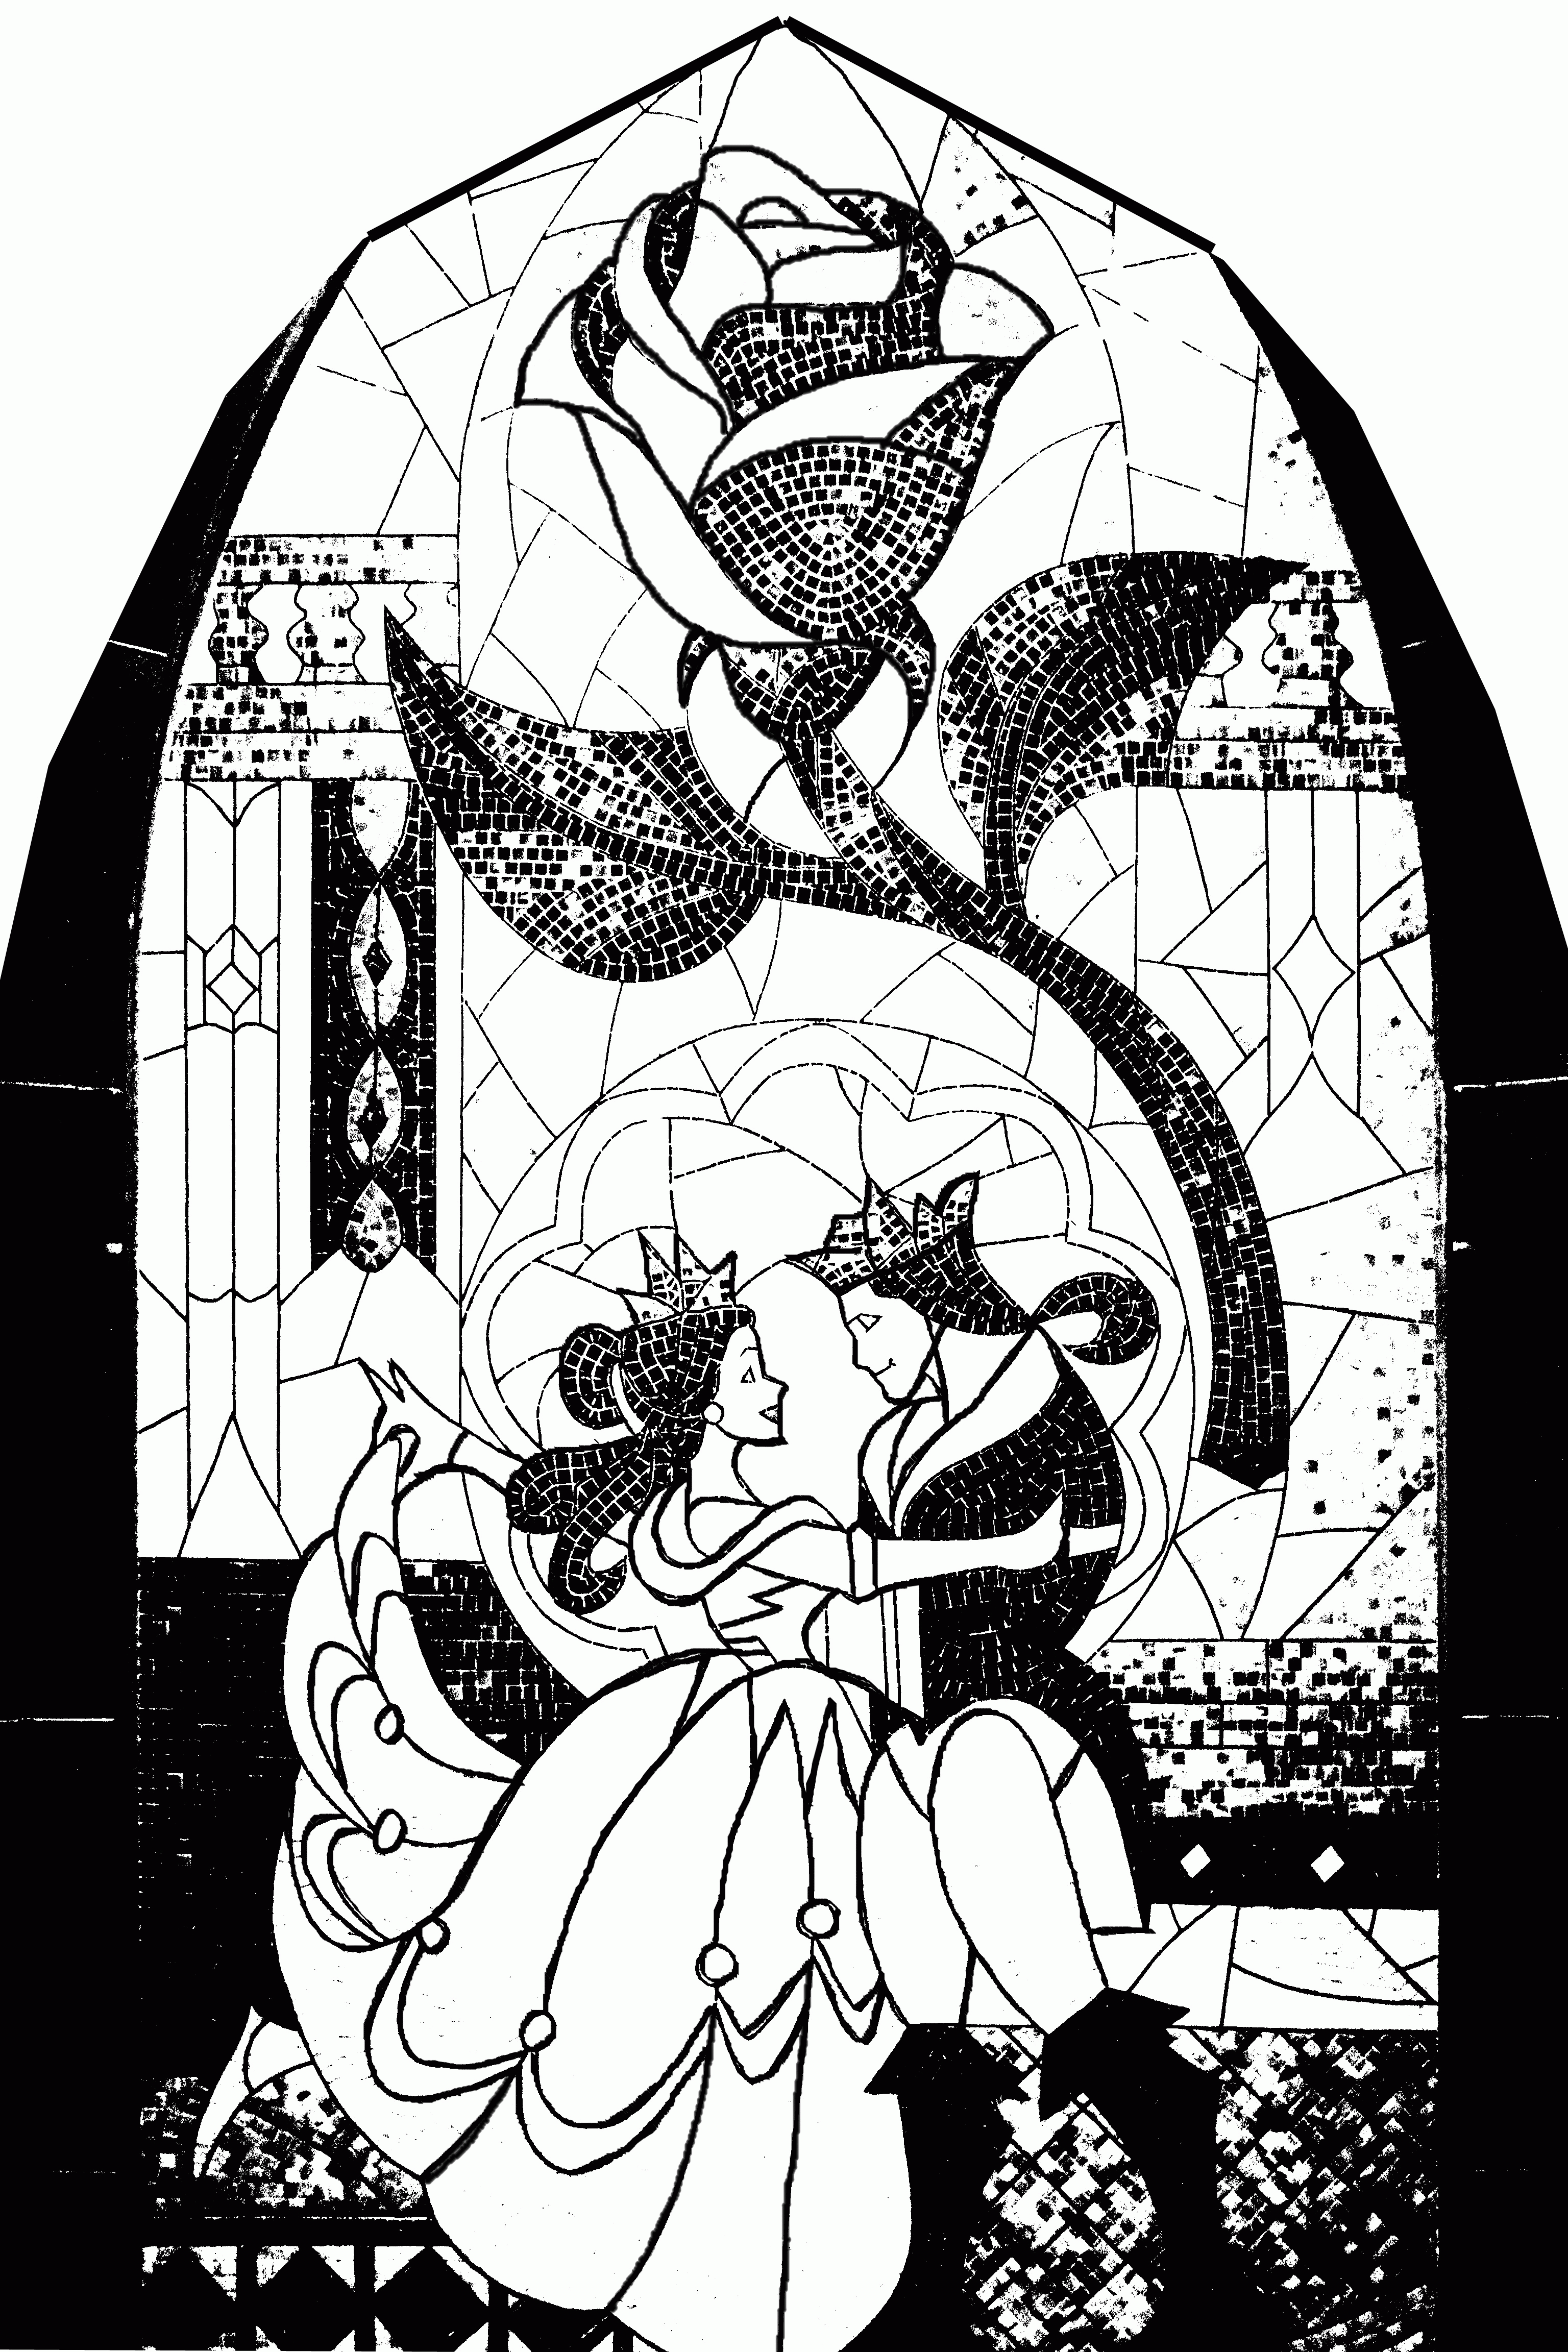 Free Beauty And The Beast Stained Glass Window Coloring Page Download Free Beauty And The Beast Stained Glass Window Coloring Page Png Images Free Cliparts On Clipart Library